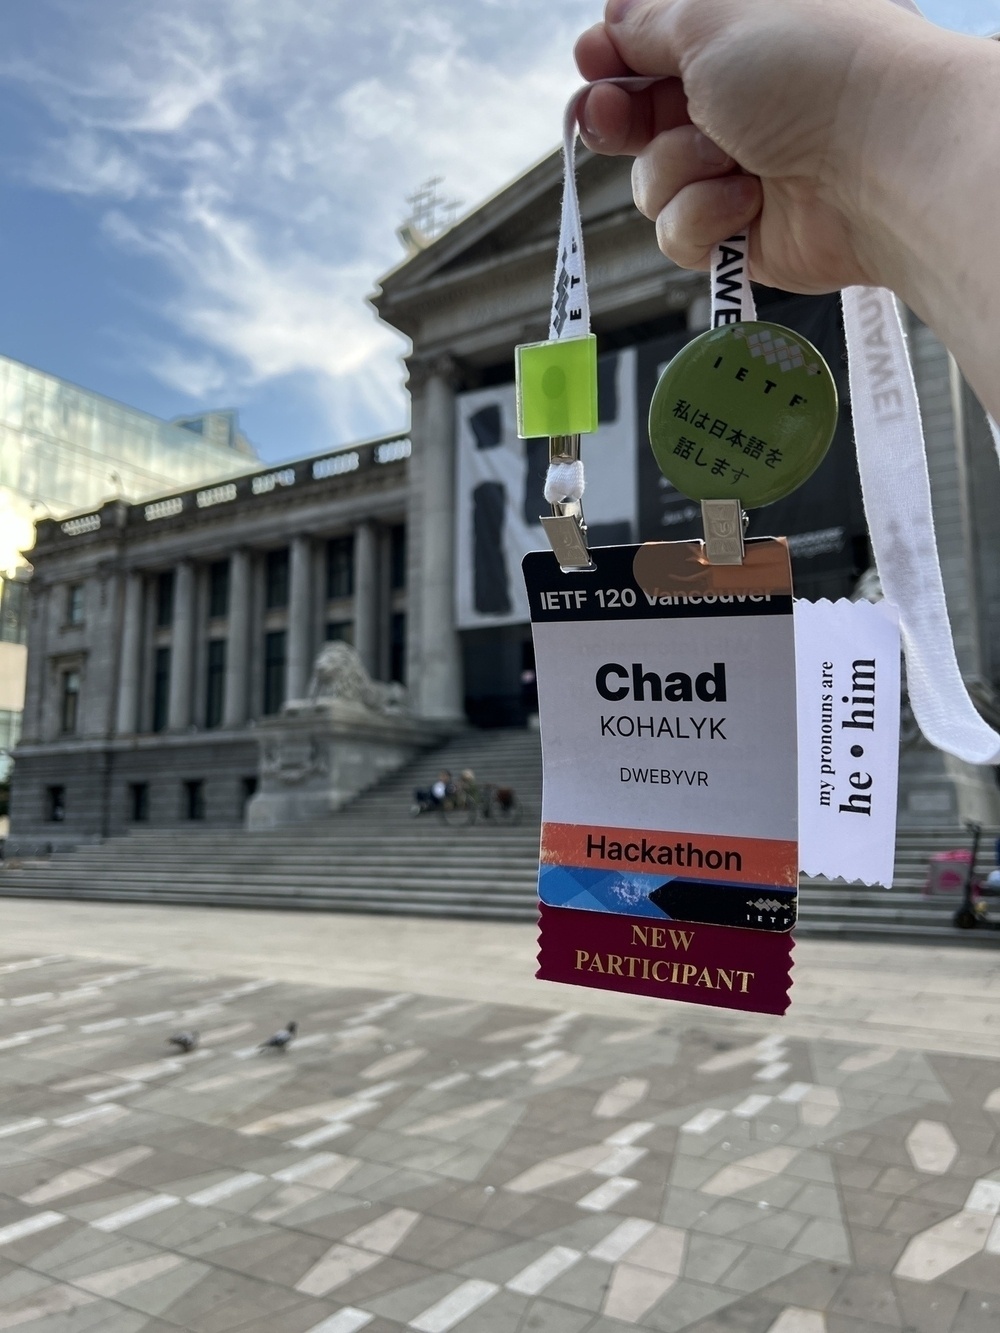 Chad’s ratty IETF badge held up with the Vancouver Art Museum in the background